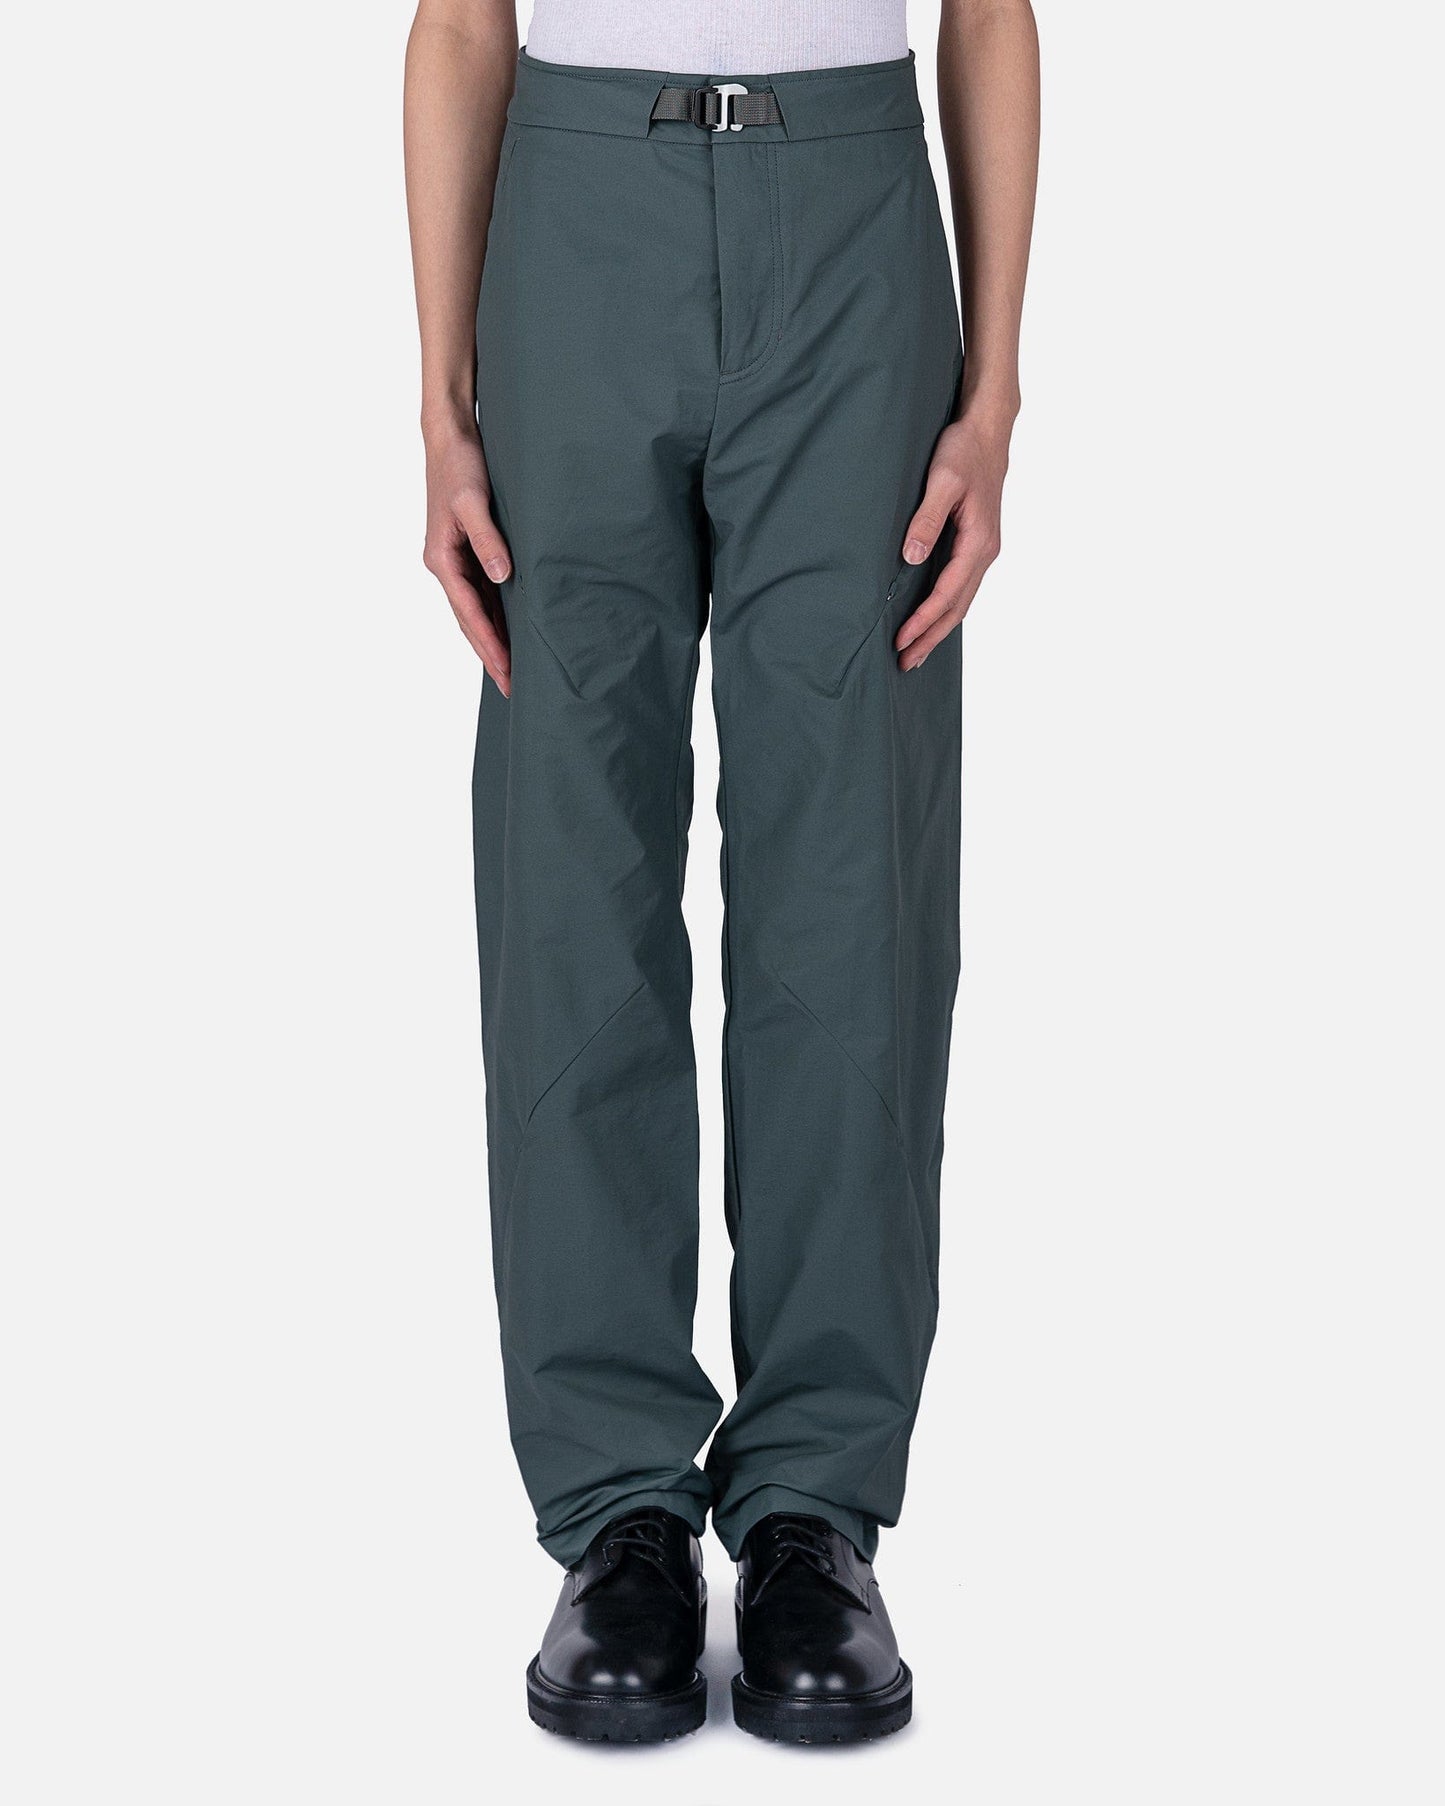 POST ARCHIVE FACTION (P.A.F) Men's Pants 5.0 Technical Pants Right in Teal